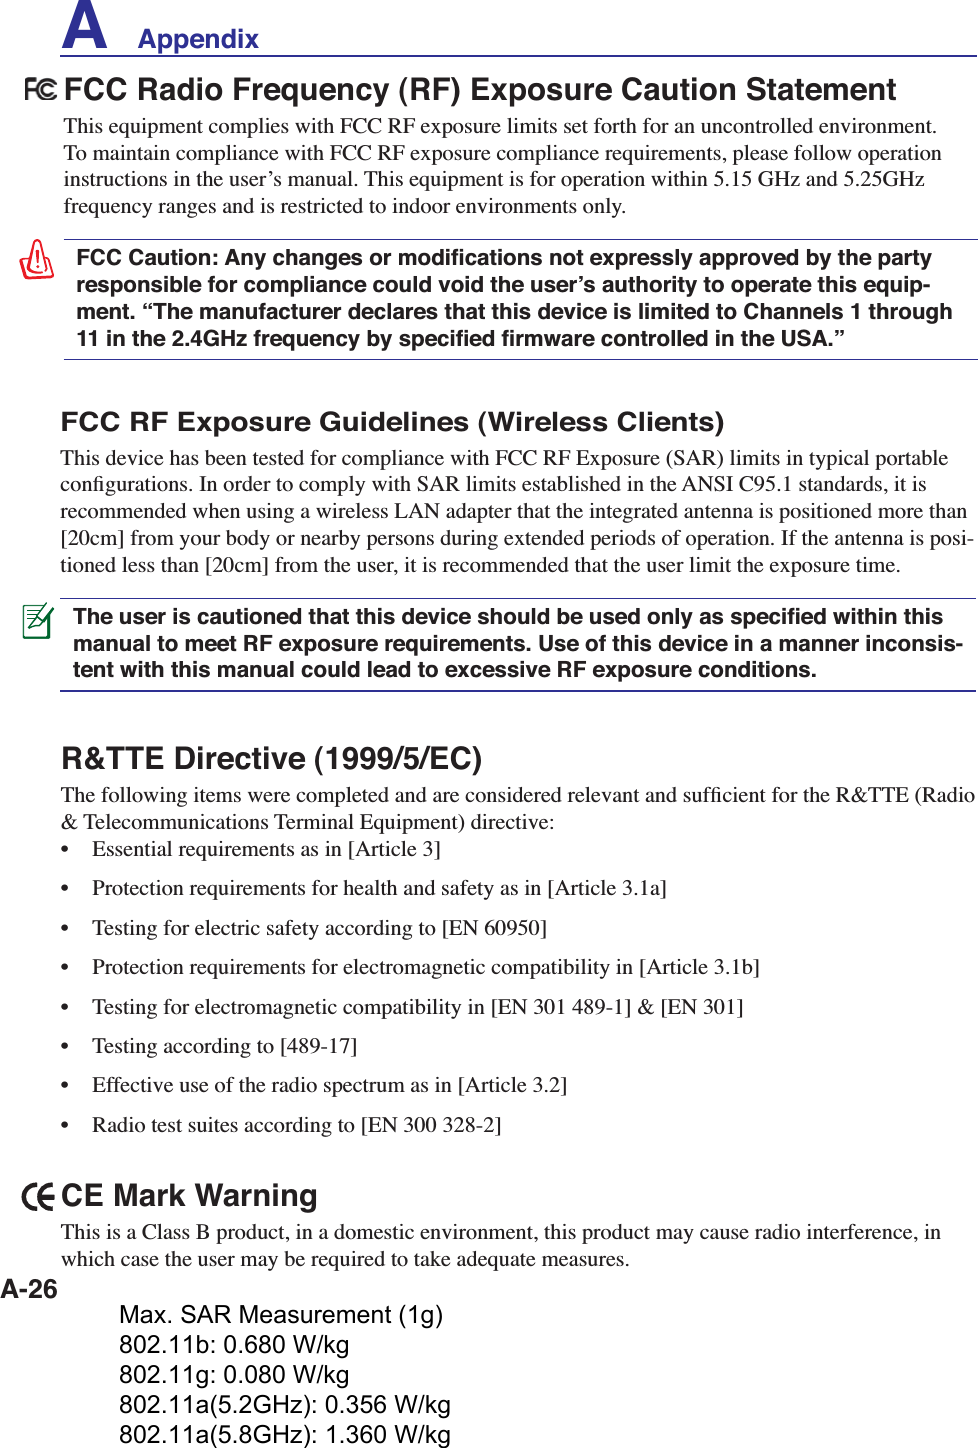 A-26R&amp;TTE Directive (1999/5/EC)The following items were completed and are considered relevant and sufﬁcient for the R&amp;TTE (Radio &amp; Telecommunications Terminal Equipment) directive:•  Essential requirements as in [Article 3]•  Protection requirements for health and safety as in [Article 3.1a]•  Testing for electric safety according to [EN 60950]•  Protection requirements for electromagnetic compatibility in [Article 3.1b]•  Testing for electromagnetic compatibility in [EN 301 489-1] &amp; [EN 301]•  Testing according to [489-17]•  Effective use of the radio spectrum as in [Article 3.2]•  Radio test suites according to [EN 300 328-2]FCC Radio Frequency (RF) Exposure Caution StatementThis equipment complies with FCC RF exposure limits set forth for an uncontrolled environment. To maintain compliance with FCC RF exposure compliance requirements, please follow operation instructions in the userʼs manual. This equipment is for operation within 5.15 GHz and 5.25GHz frequency ranges and is restricted to indoor environments only.FCC Caution: Any changes or modiﬁcations not expressly approved by the party responsible for compliance could void the userʼs authority to operate this equip-ment. “The manufacturer declares that this device is limited to Channels 1 through 11 in the 2.4GHz frequency by speciﬁed ﬁrmware controlled in the USA.”FCC RF Exposure Guidelines (Wireless Clients)This device has been tested for compliance with FCC RF Exposure (SAR) limits in typical portable conﬁgurations. In order to comply with SAR limits established in the ANSI C95.1 standards, it is recommended when using a wireless LAN adapter that the integrated antenna is positioned more than [20cm] from your body or nearby persons during extended periods of operation. If the antenna is posi-tioned less than [20cm] from the user, it is recommended that the user limit the exposure time.The user is cautioned that this device should be used only as speciﬁed within this manual to meet RF exposure requirements. Use of this device in a manner inconsis-tent with this manual could lead to excessive RF exposure conditions.CE Mark WarningThis is a Class B product, in a domestic environment, this product may cause radio interference, in which case the user may be required to take adequate measures.A    AppendixMax. SAR Measurement (1g) 802.11b: 0.680 W/kg 802.11g: 0.080 W/kg 802.11a(5.2GHz): 0.356 W/kg 802.11a(5.8GHz): 1.360 W/kg 